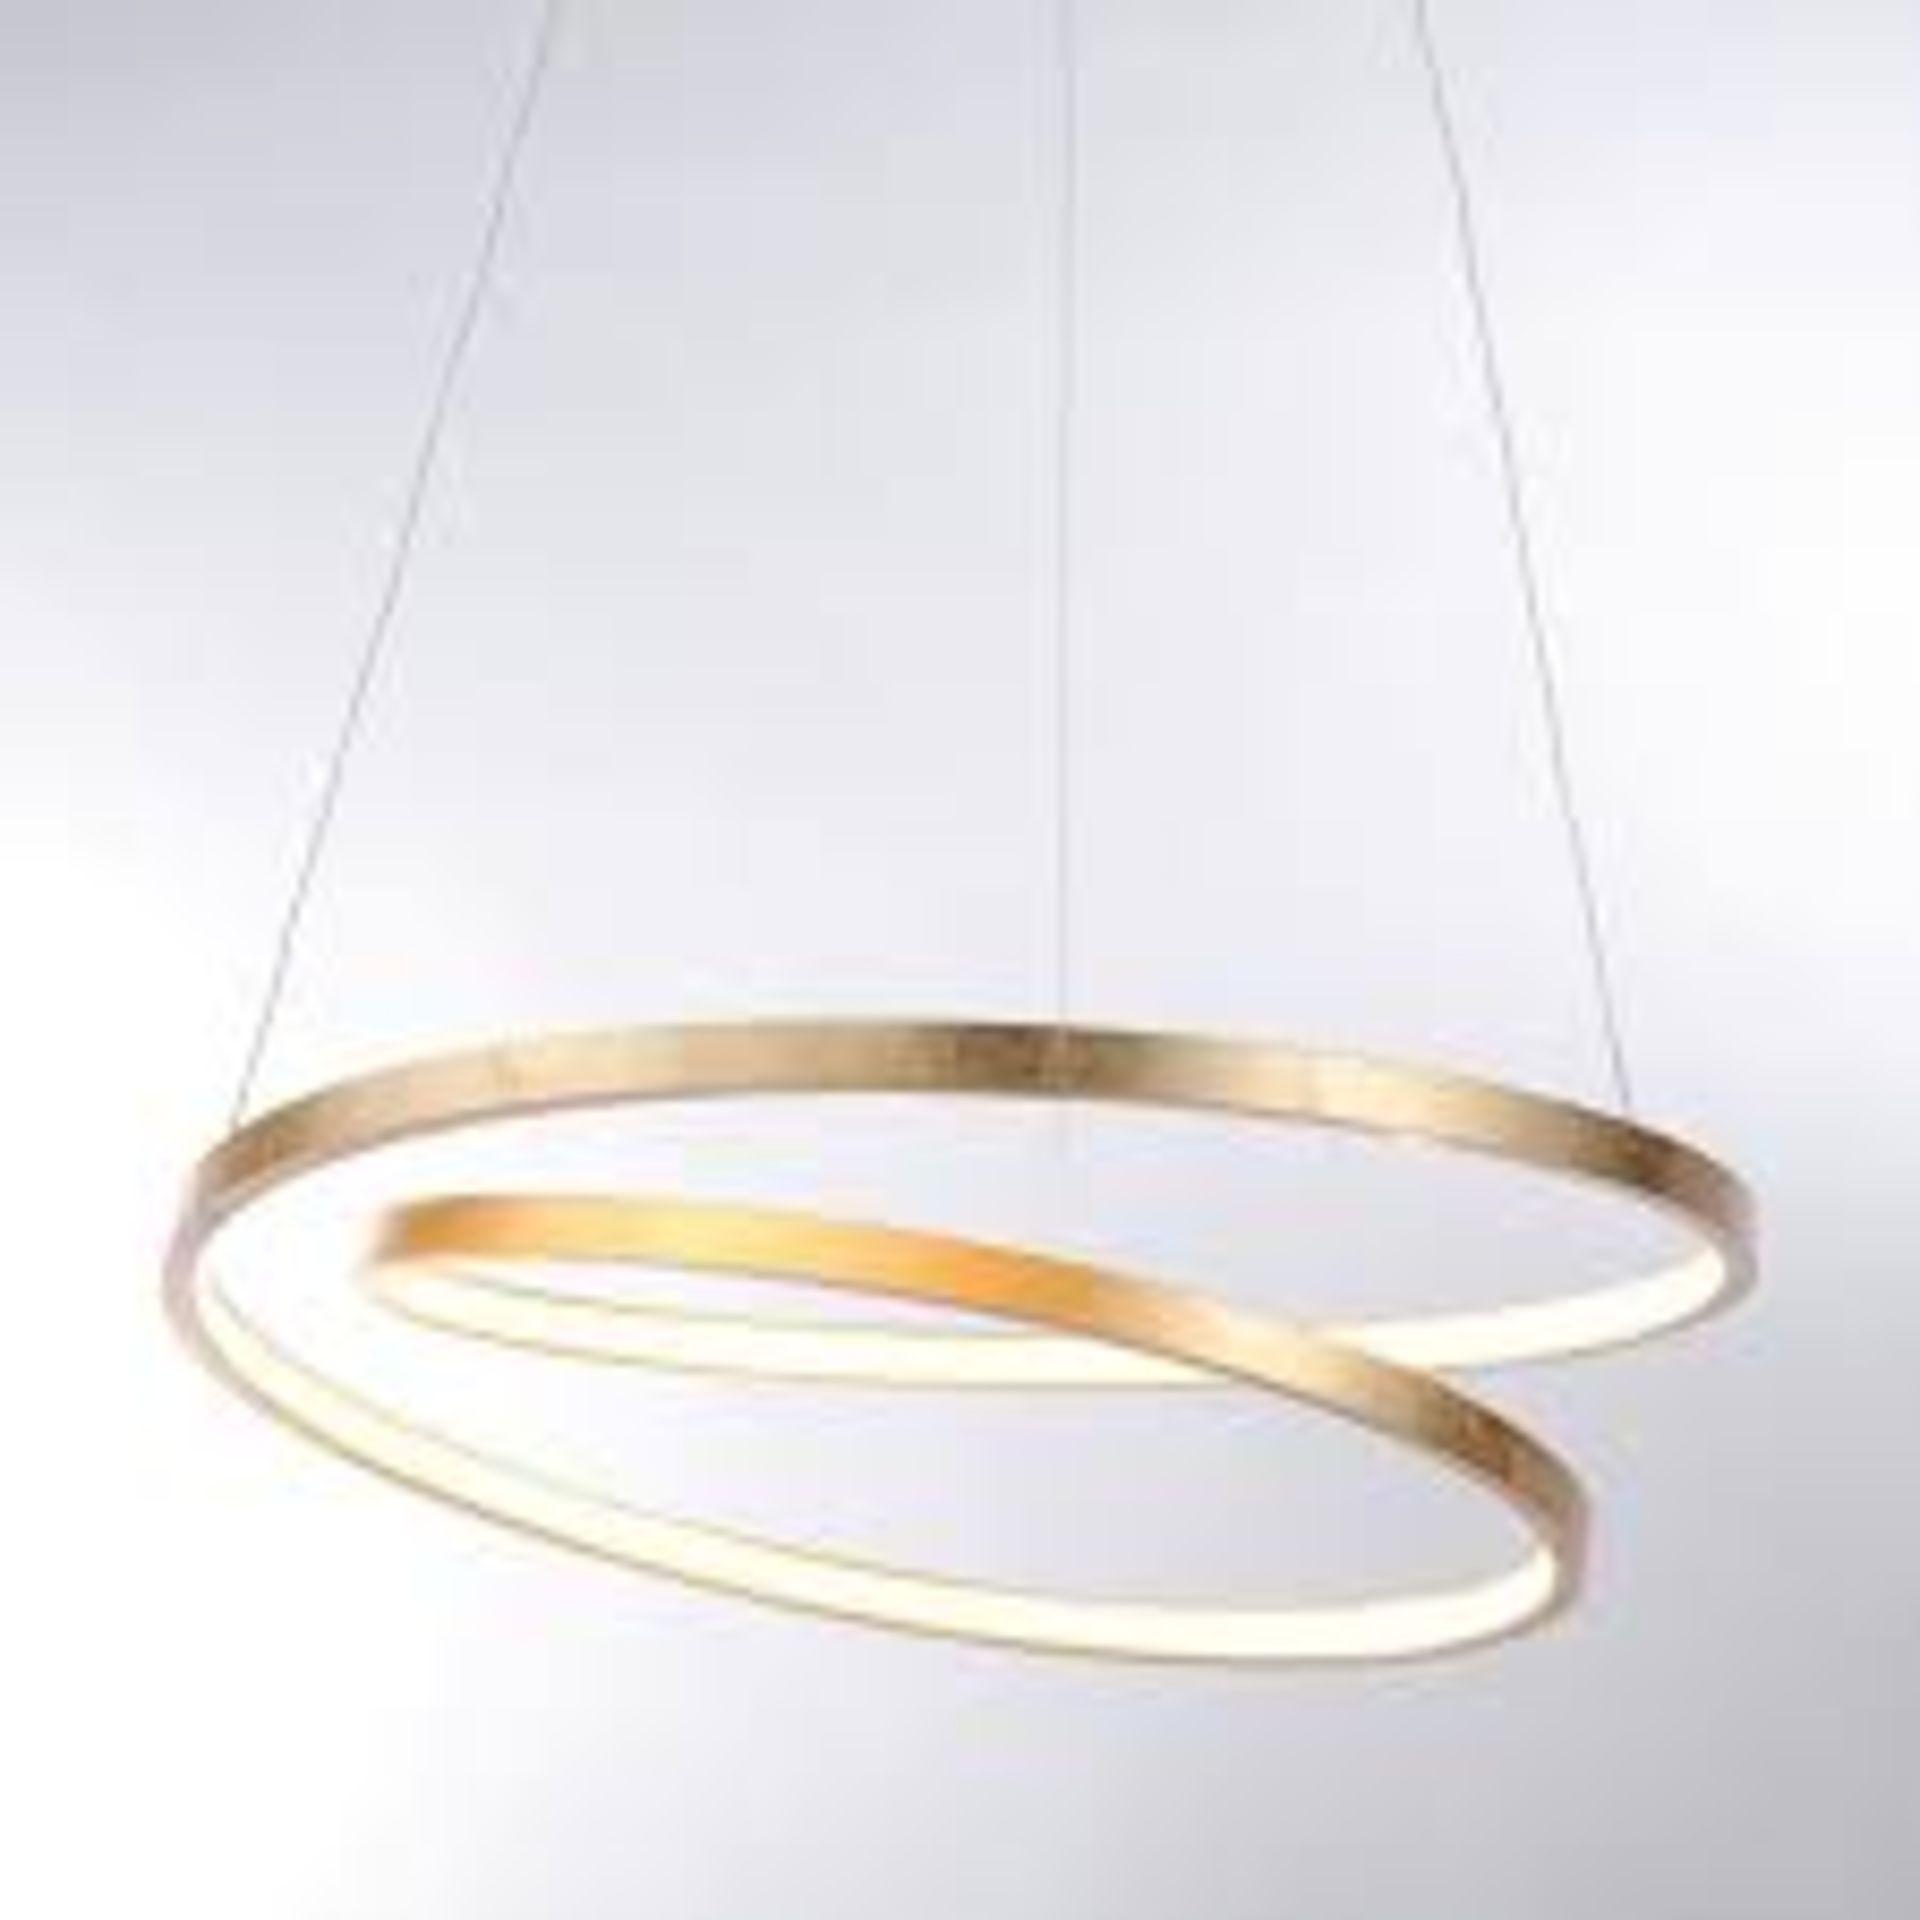 Boxed Paul Nuhouse Simply Dim Designer Ceiling Light Fitting in Gold (9993) RRP £290